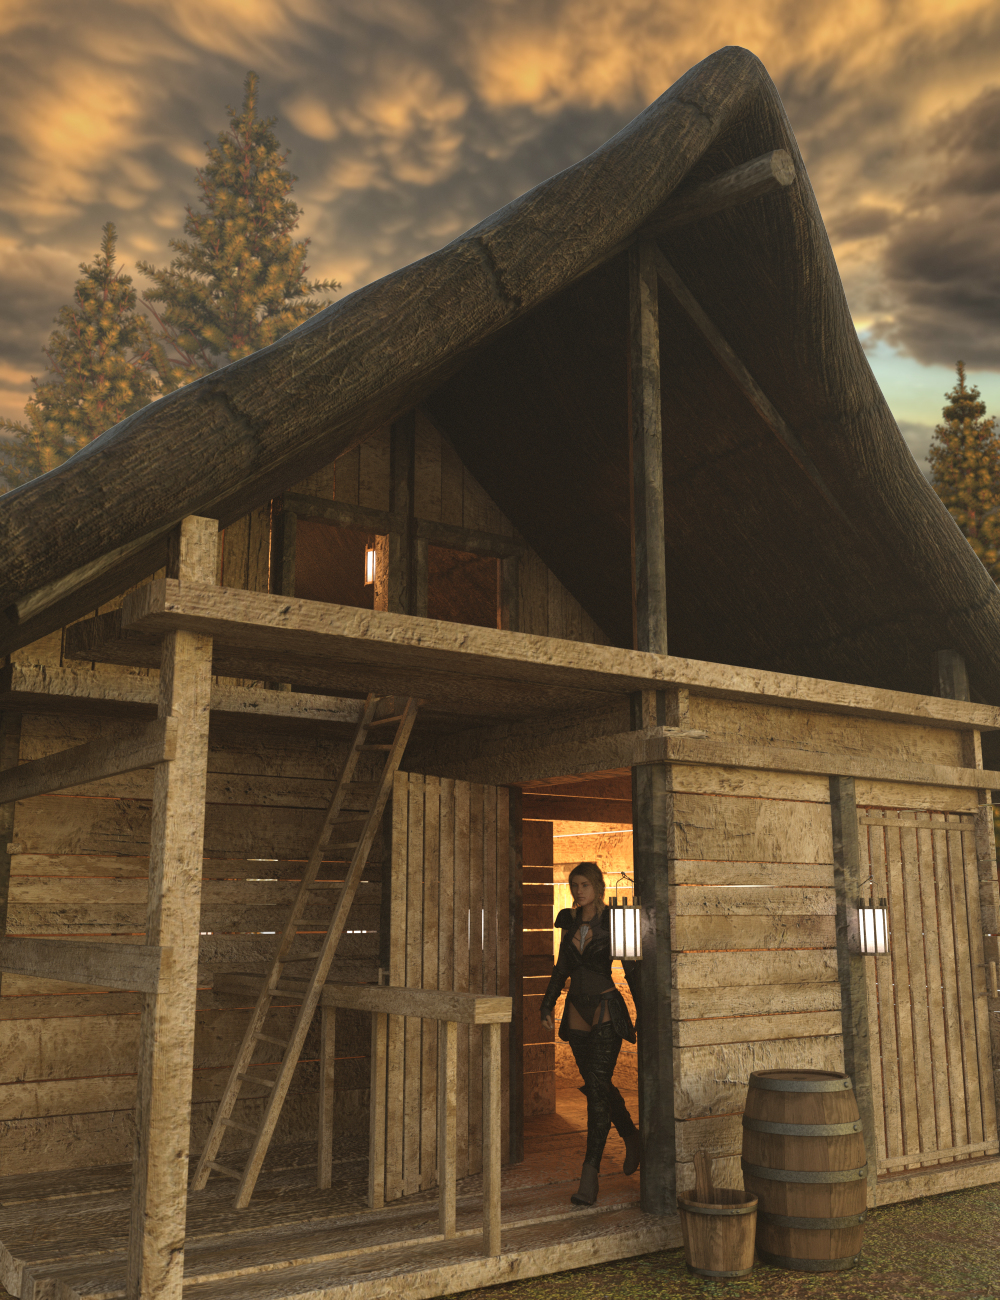 Timber Framed Houses 2 by: Enterables, 3D Models by Daz 3D